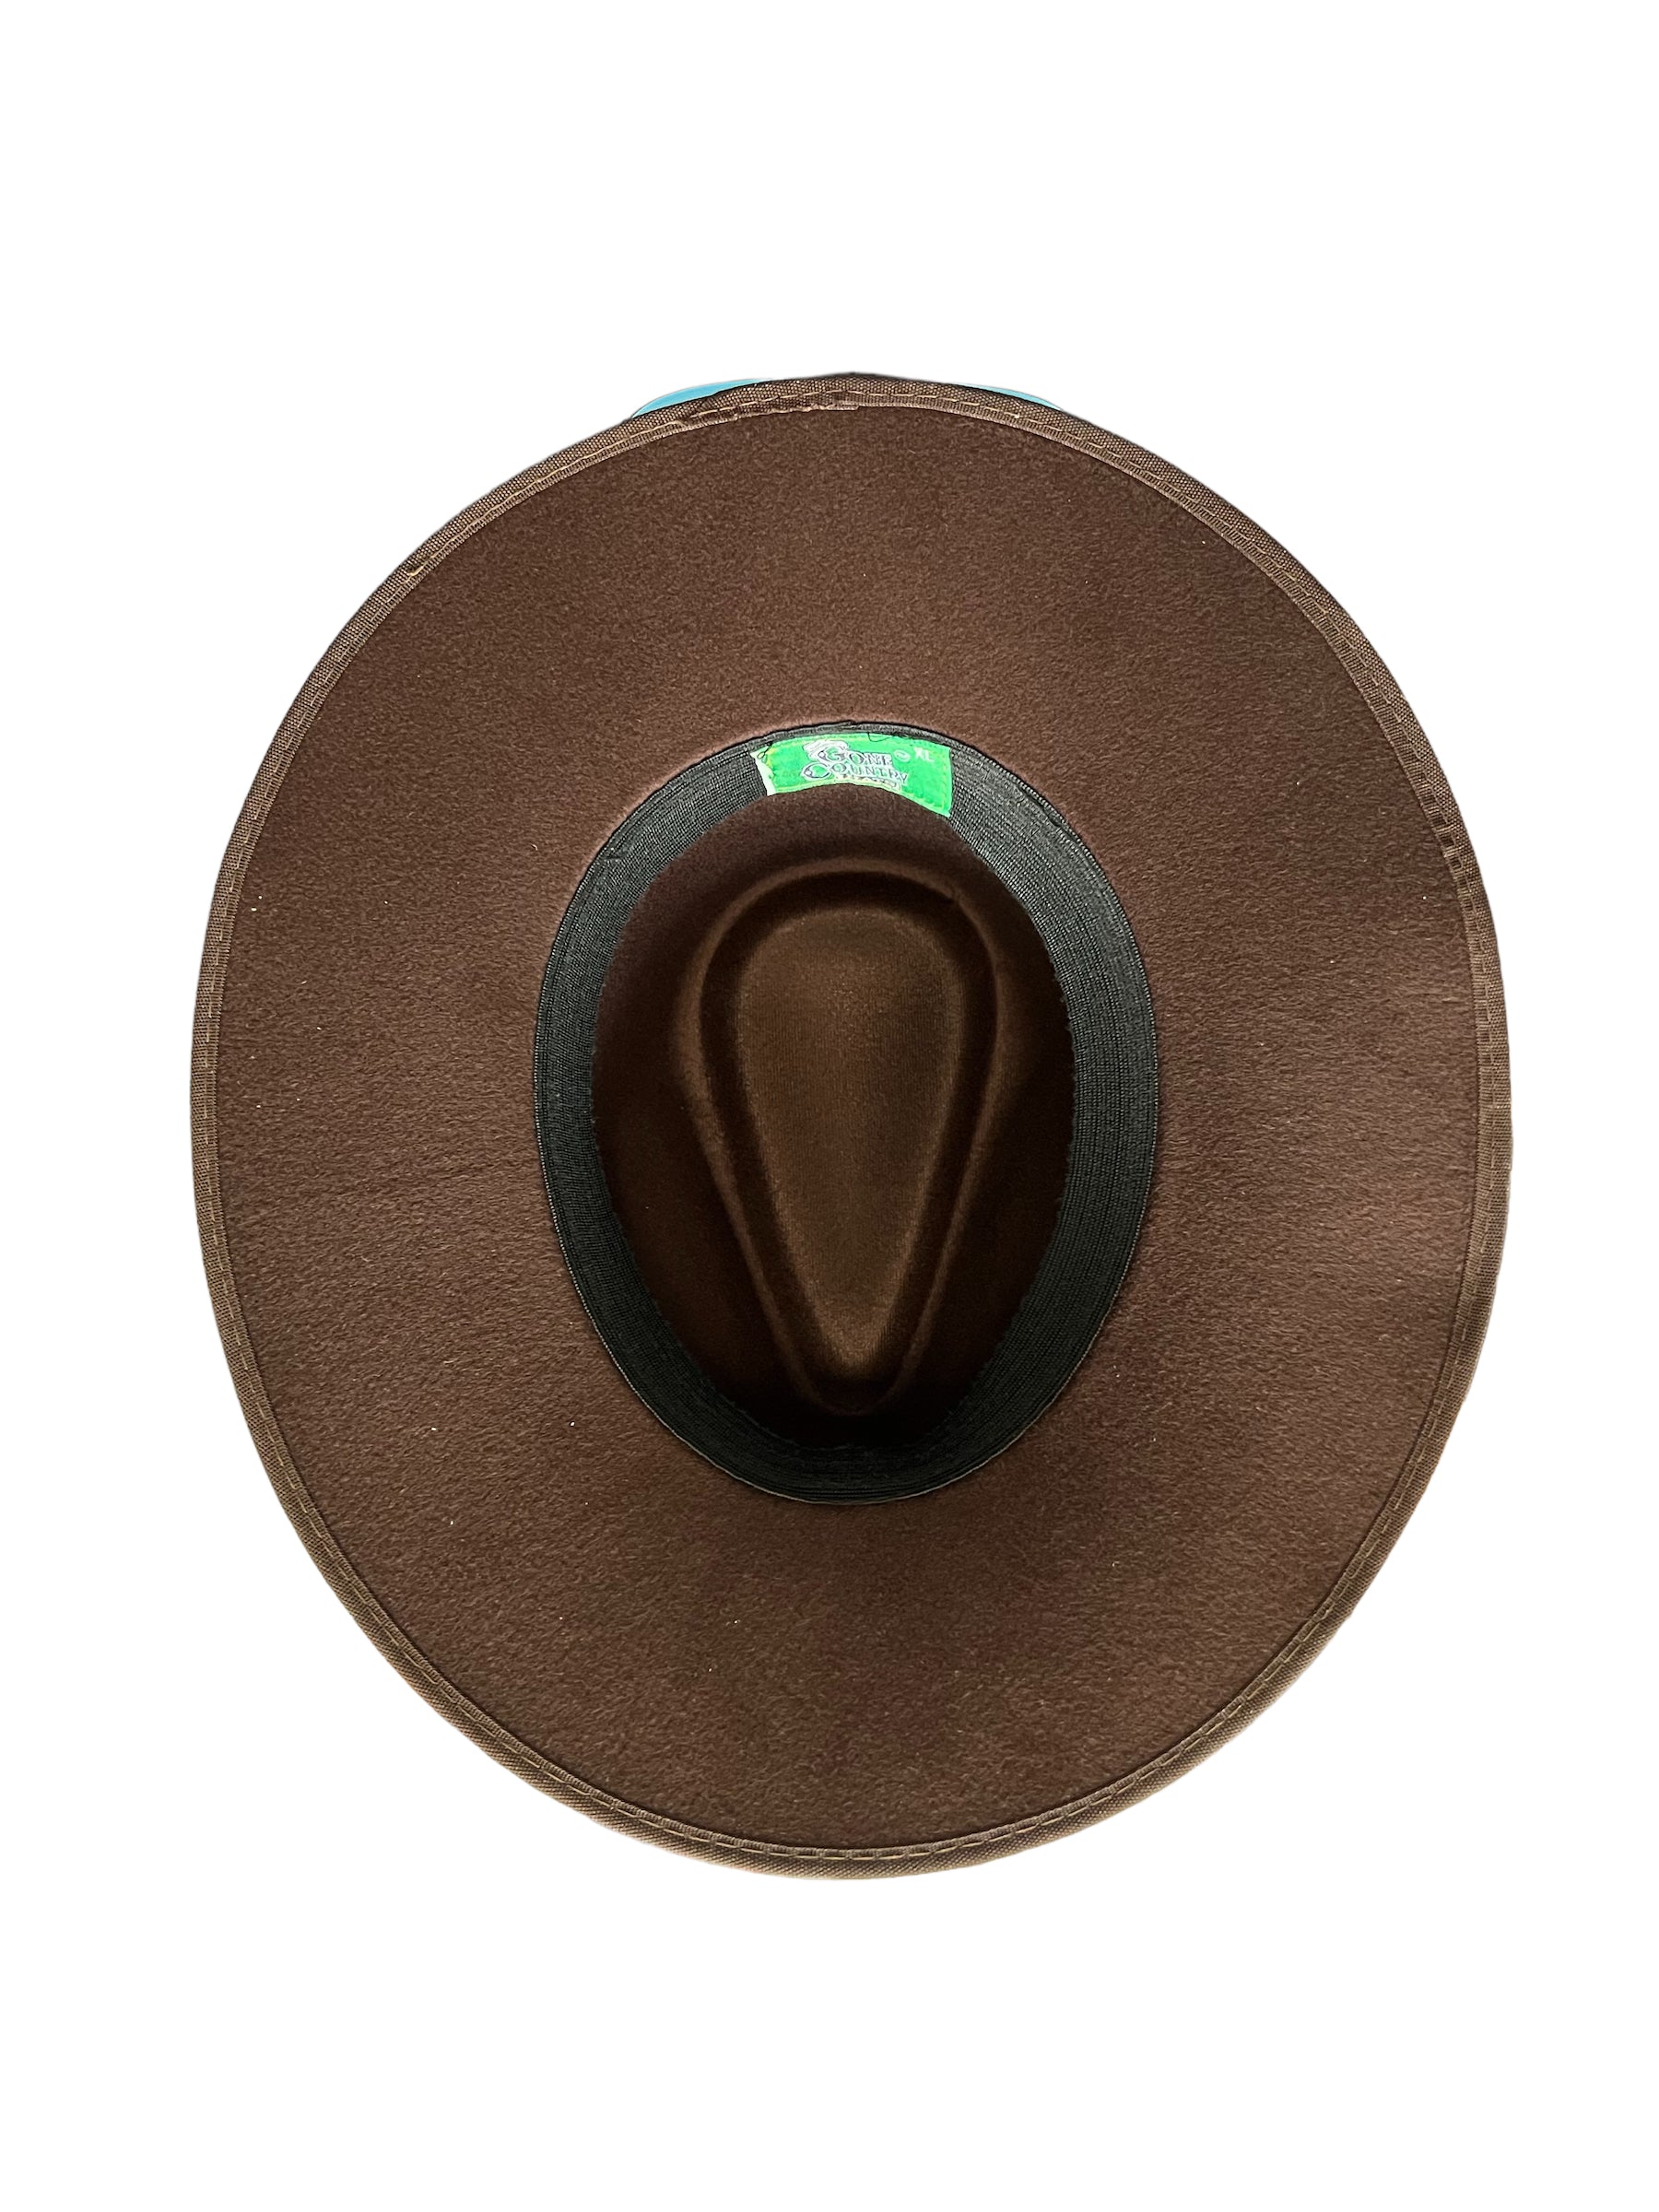 Carson City Brown Felt Western Hat Small 6-7/8 to 7